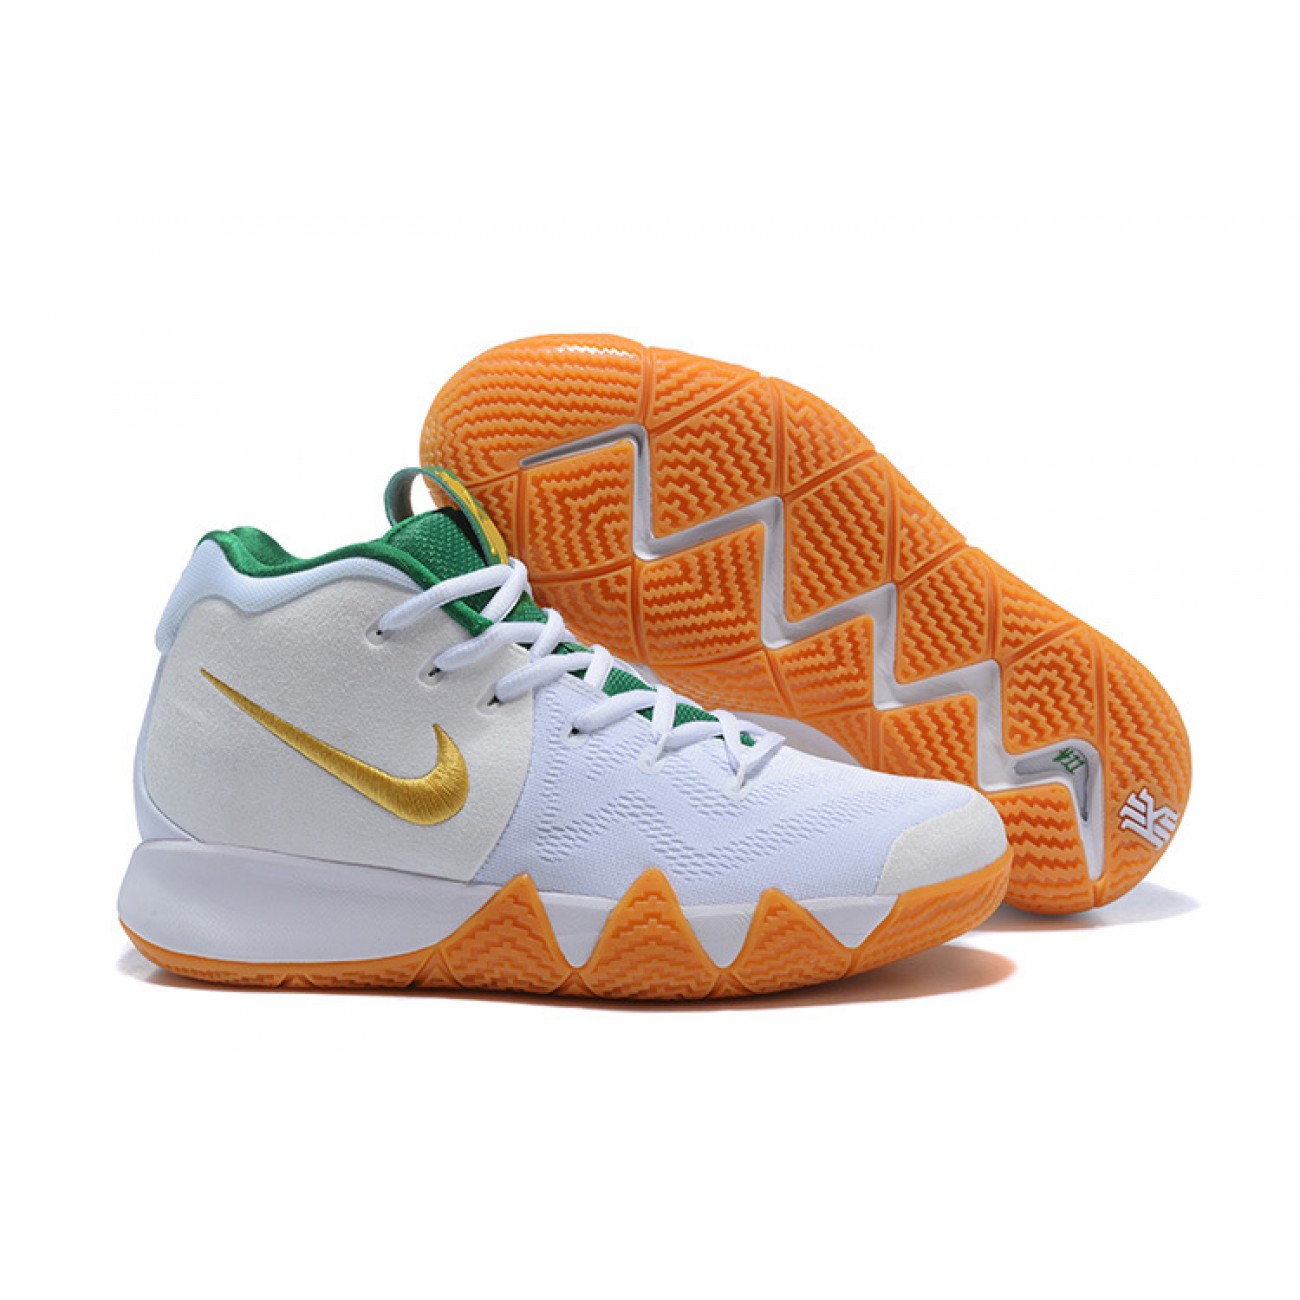 Kyrie 4 White/Green/Gold